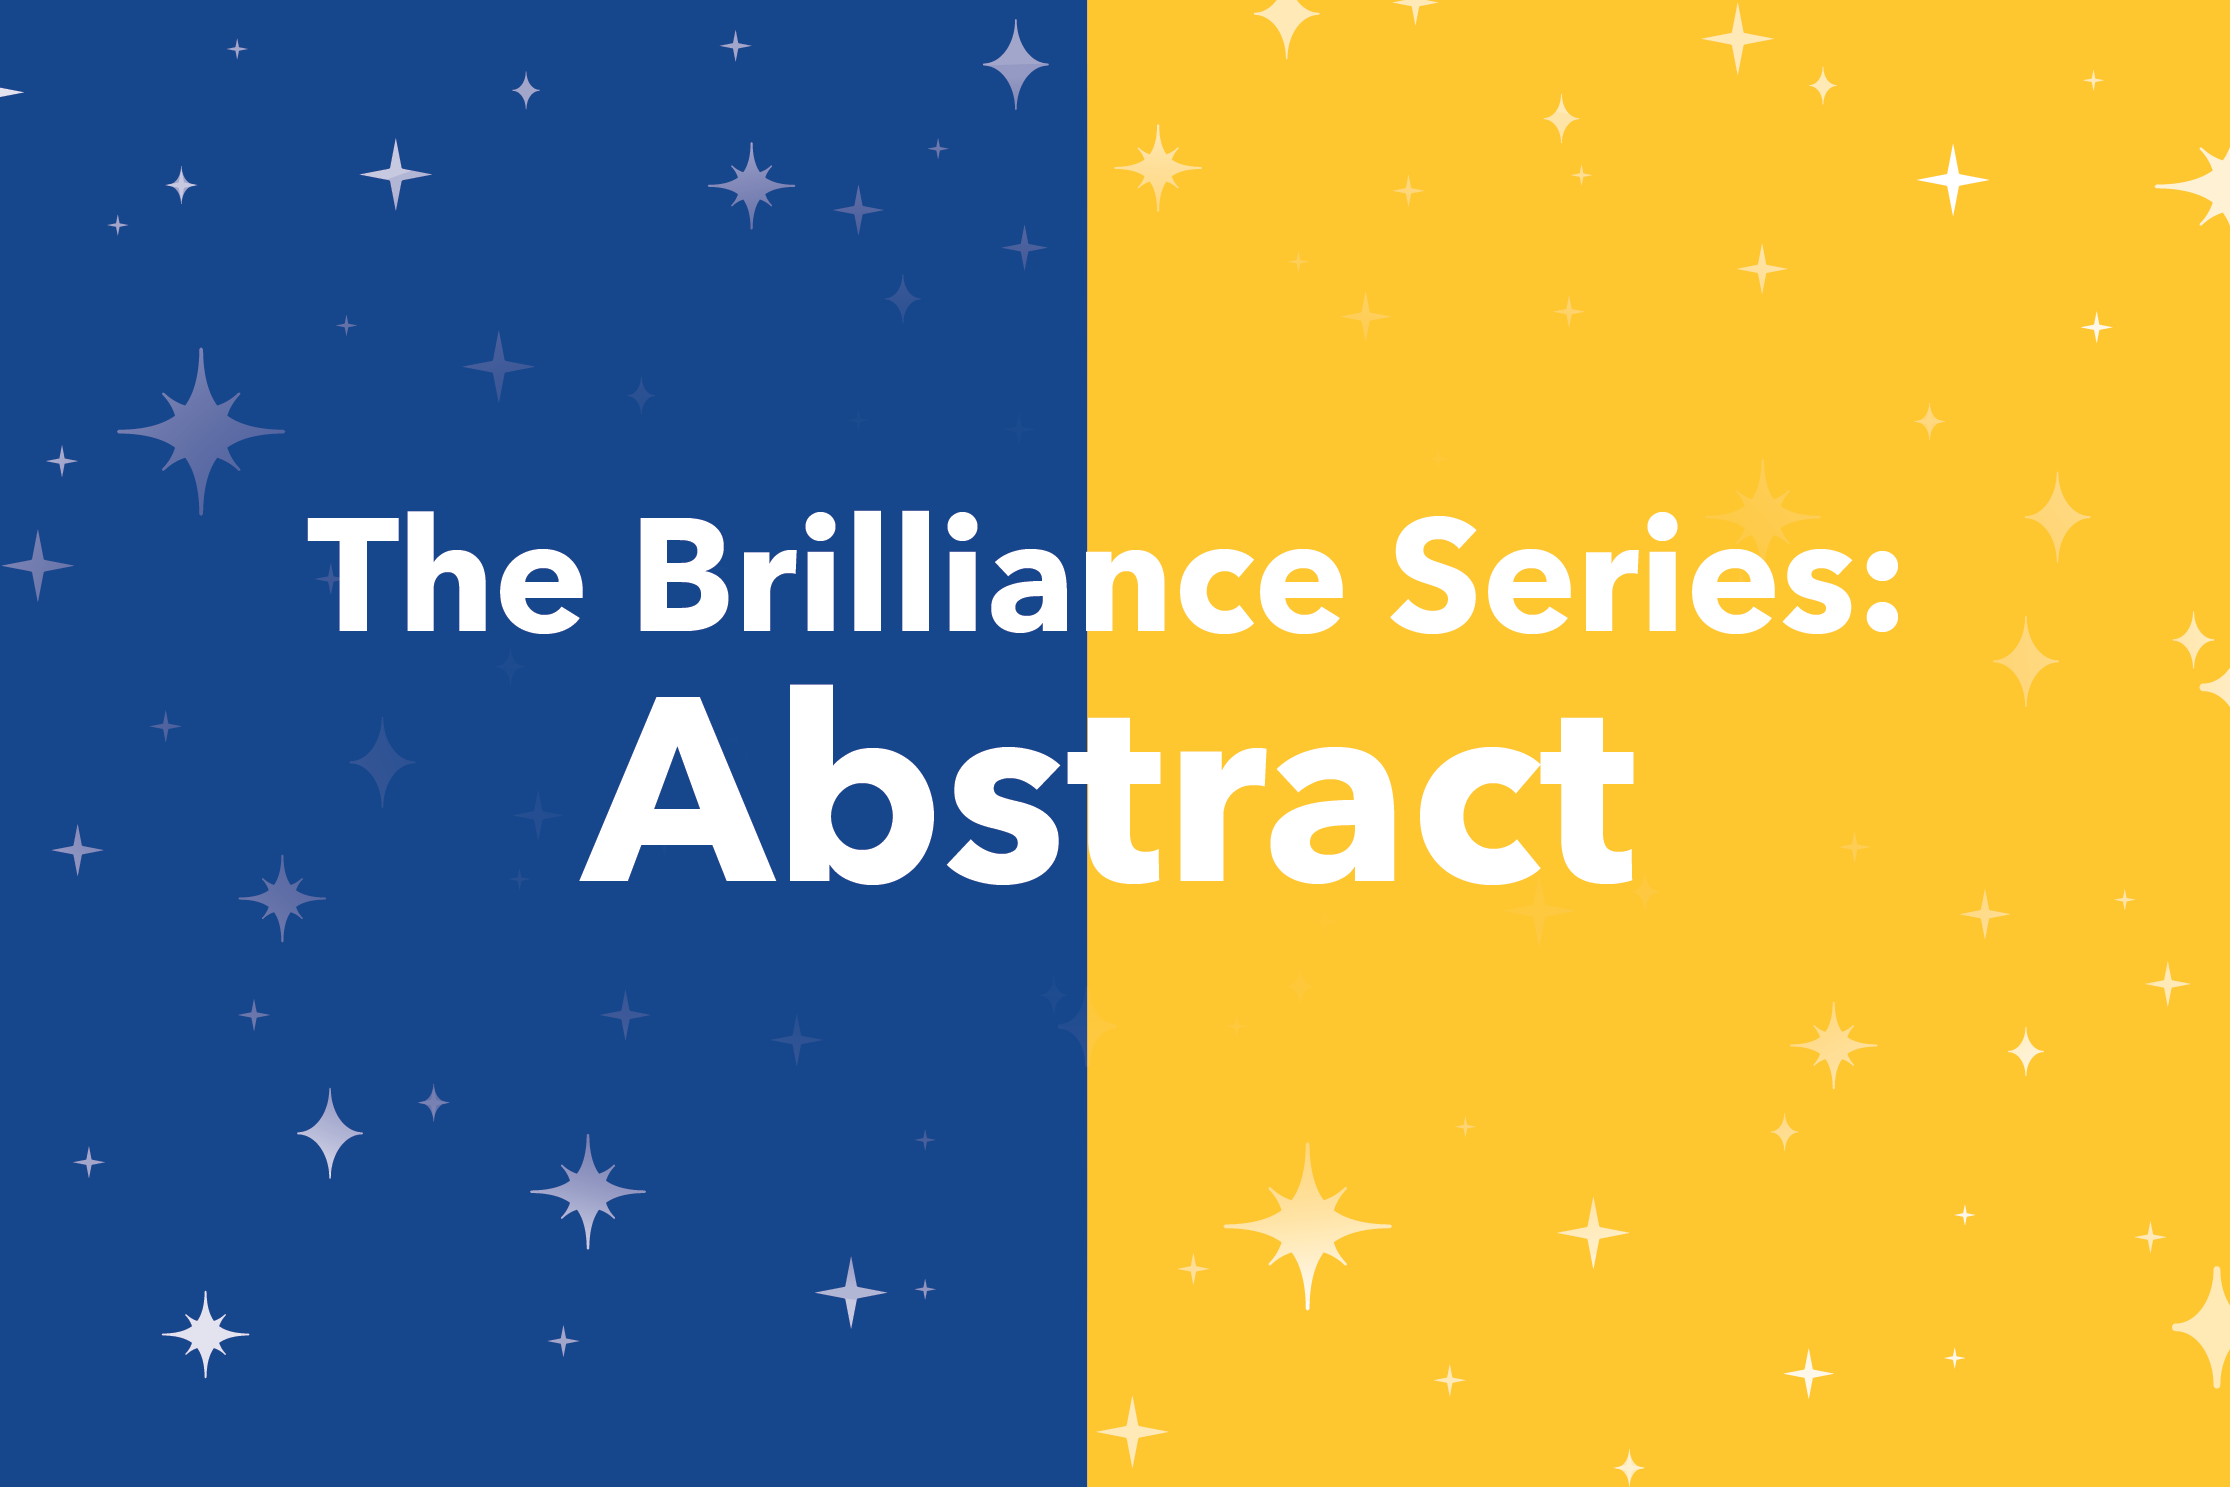 The Brilliance Series: Abstract